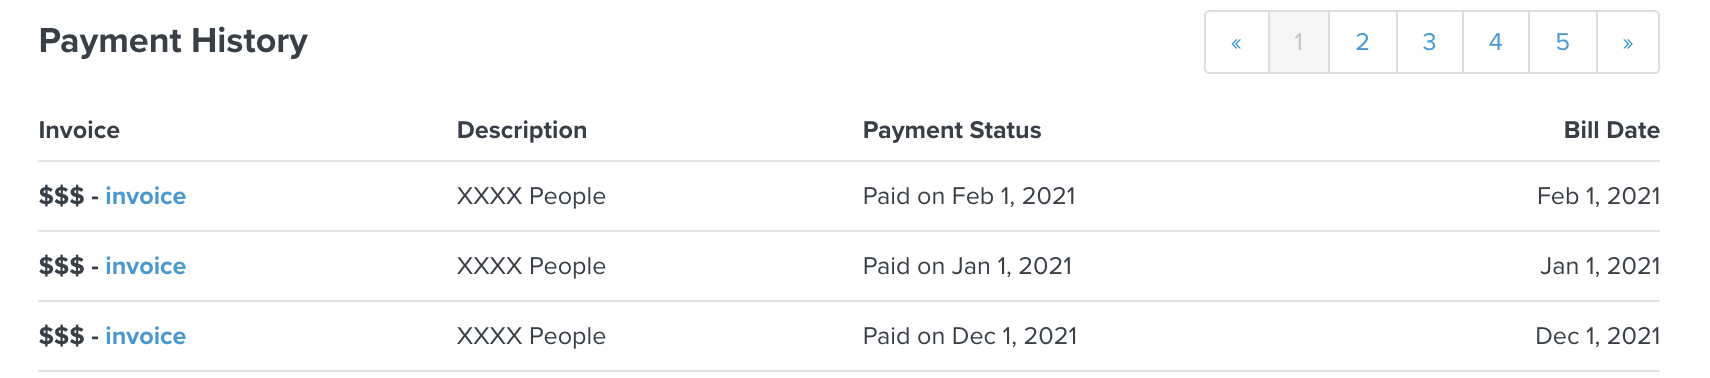 payment_history_update.png